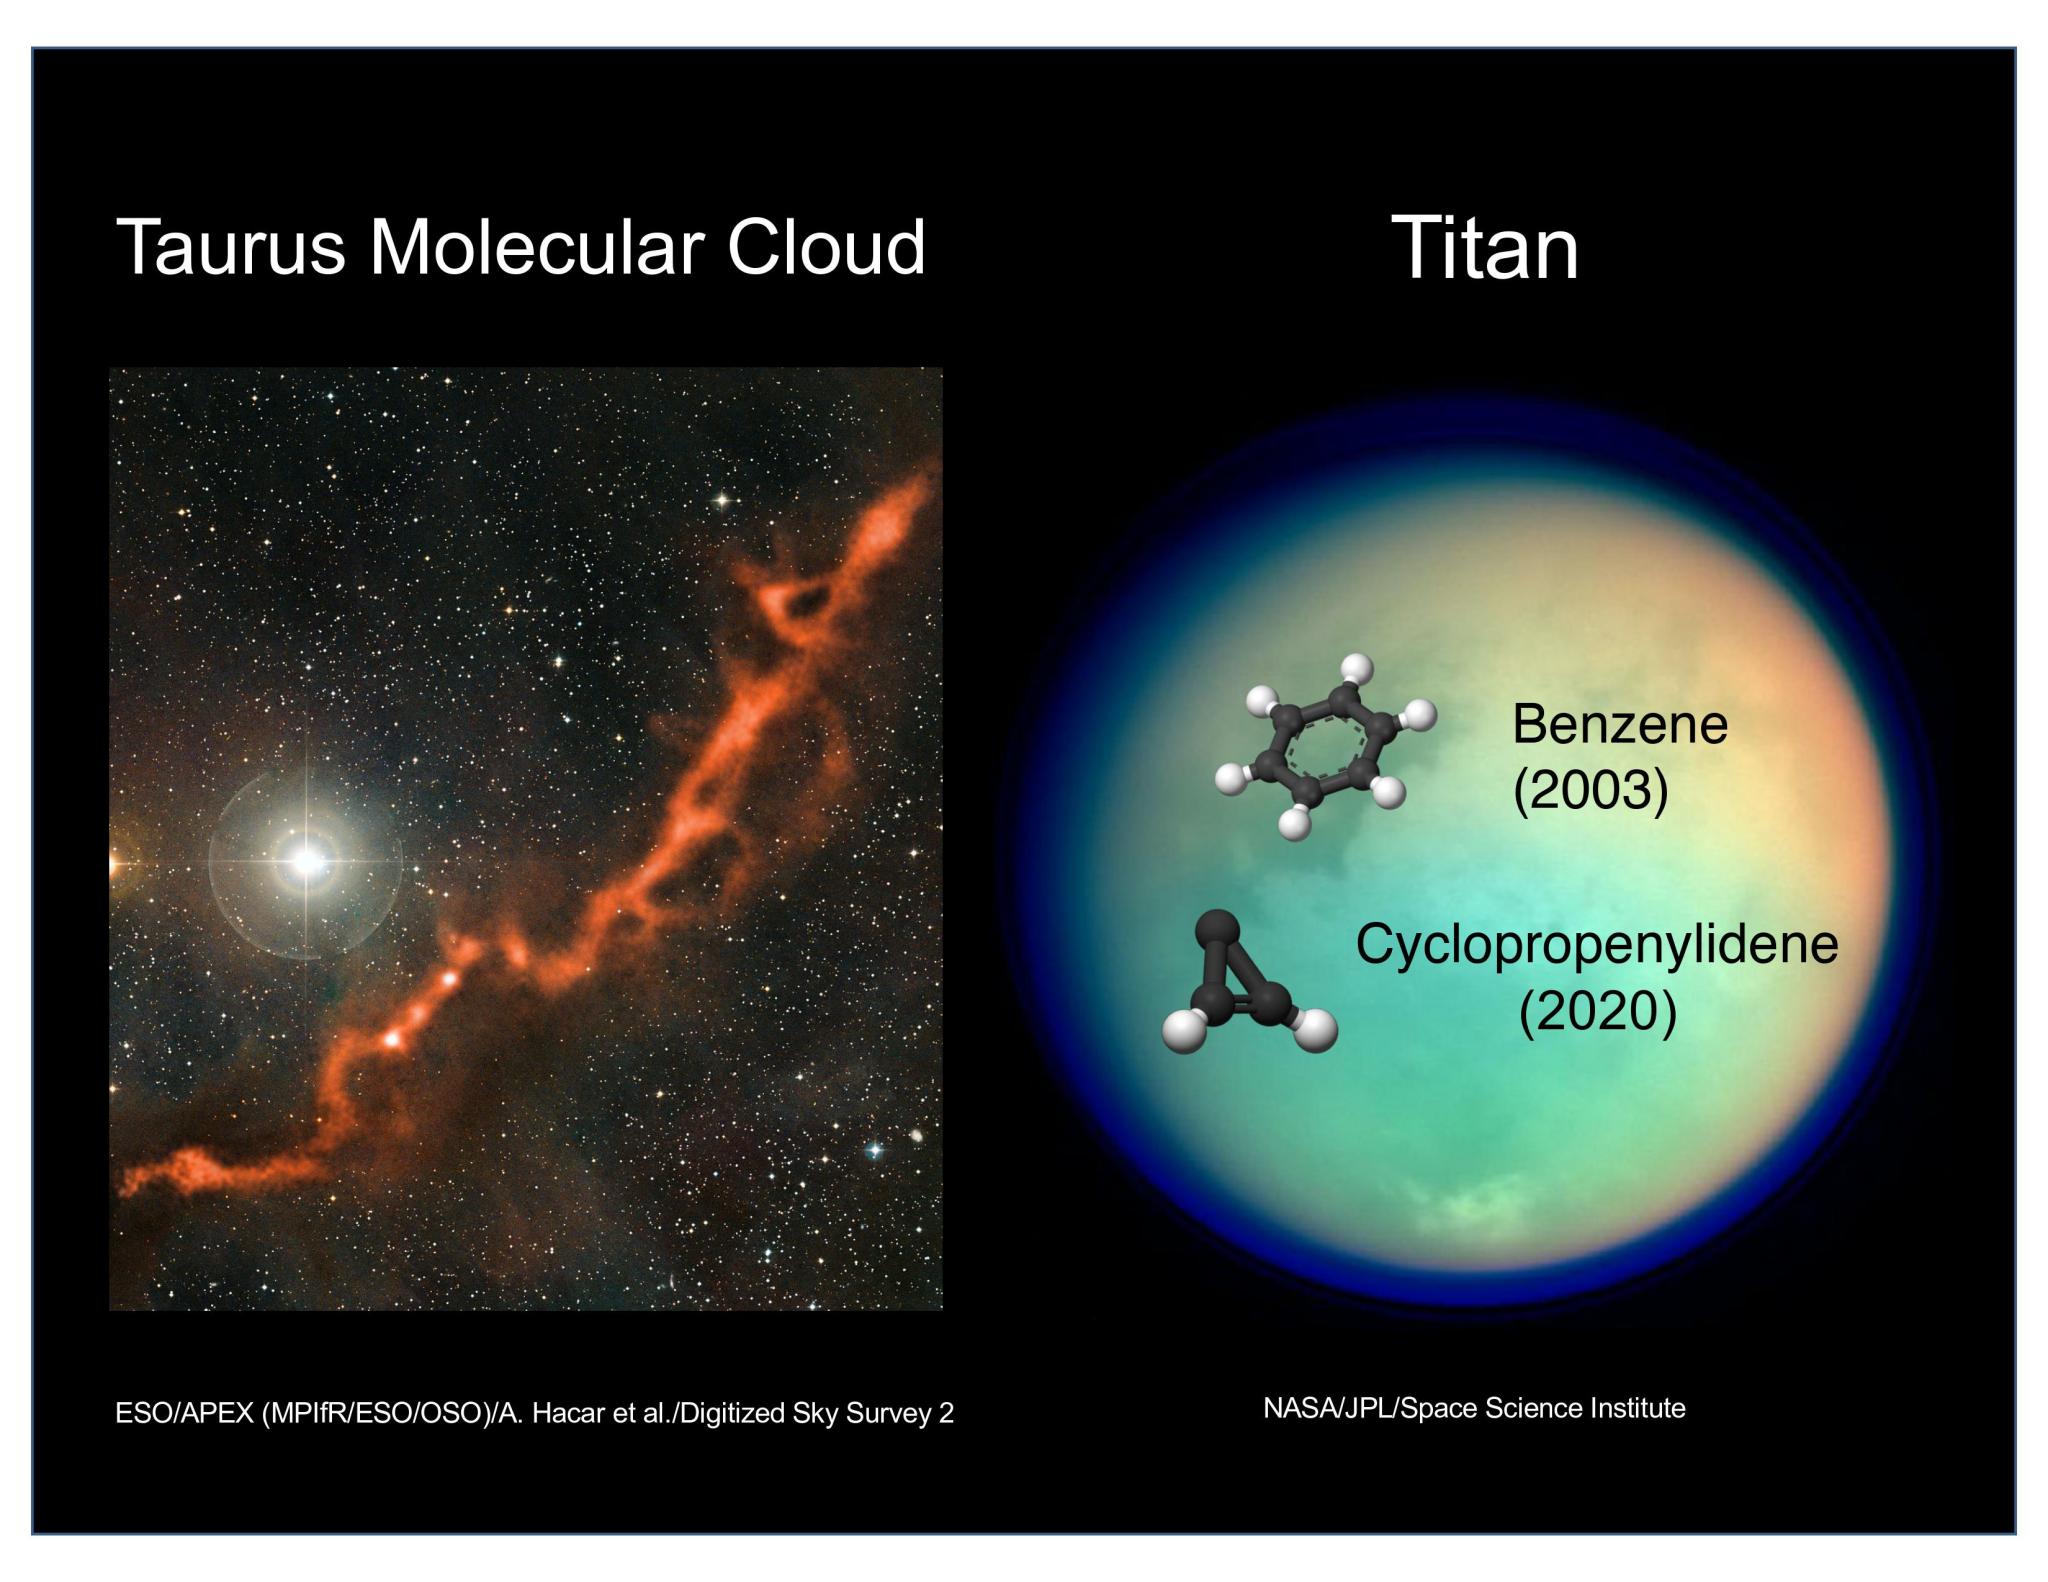 Cyclopropenylidene at Titan and in a molecular cloud